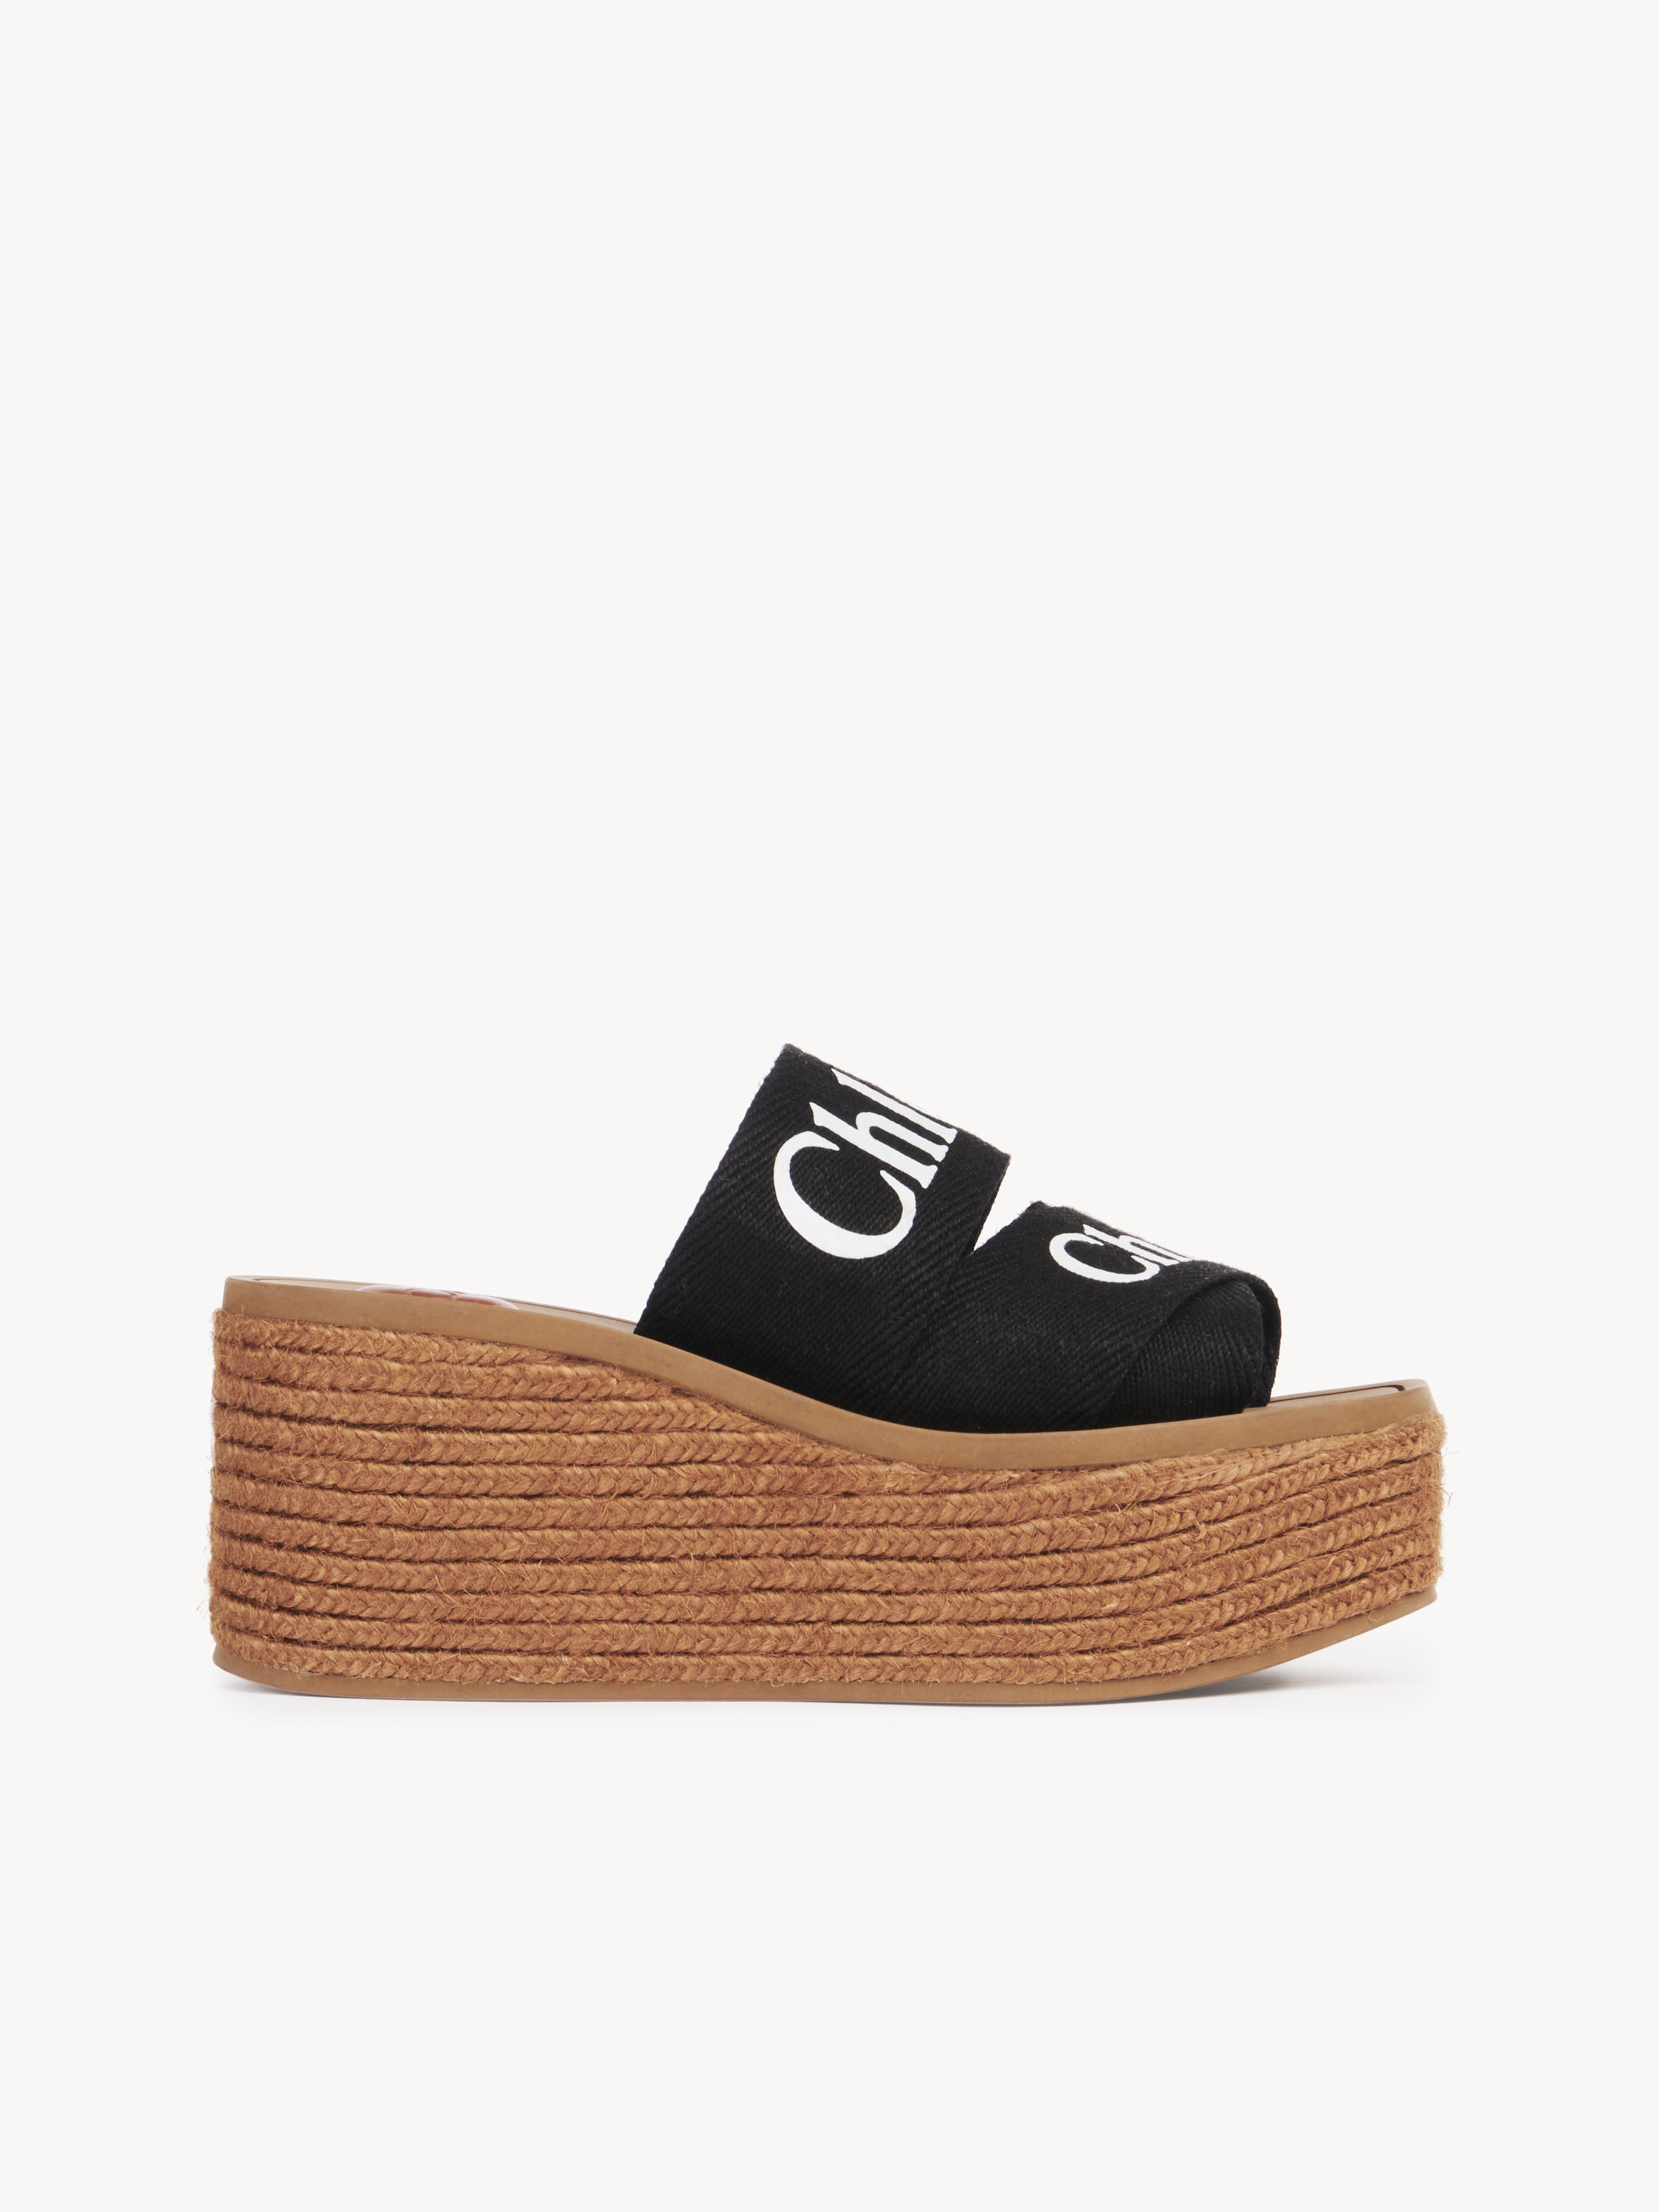 Chloé Mules Espadrilles Woody Femme Noir Taille 39 90% Lin, 10% Polyester, Quercus Suber, Farmed, Coo Spai